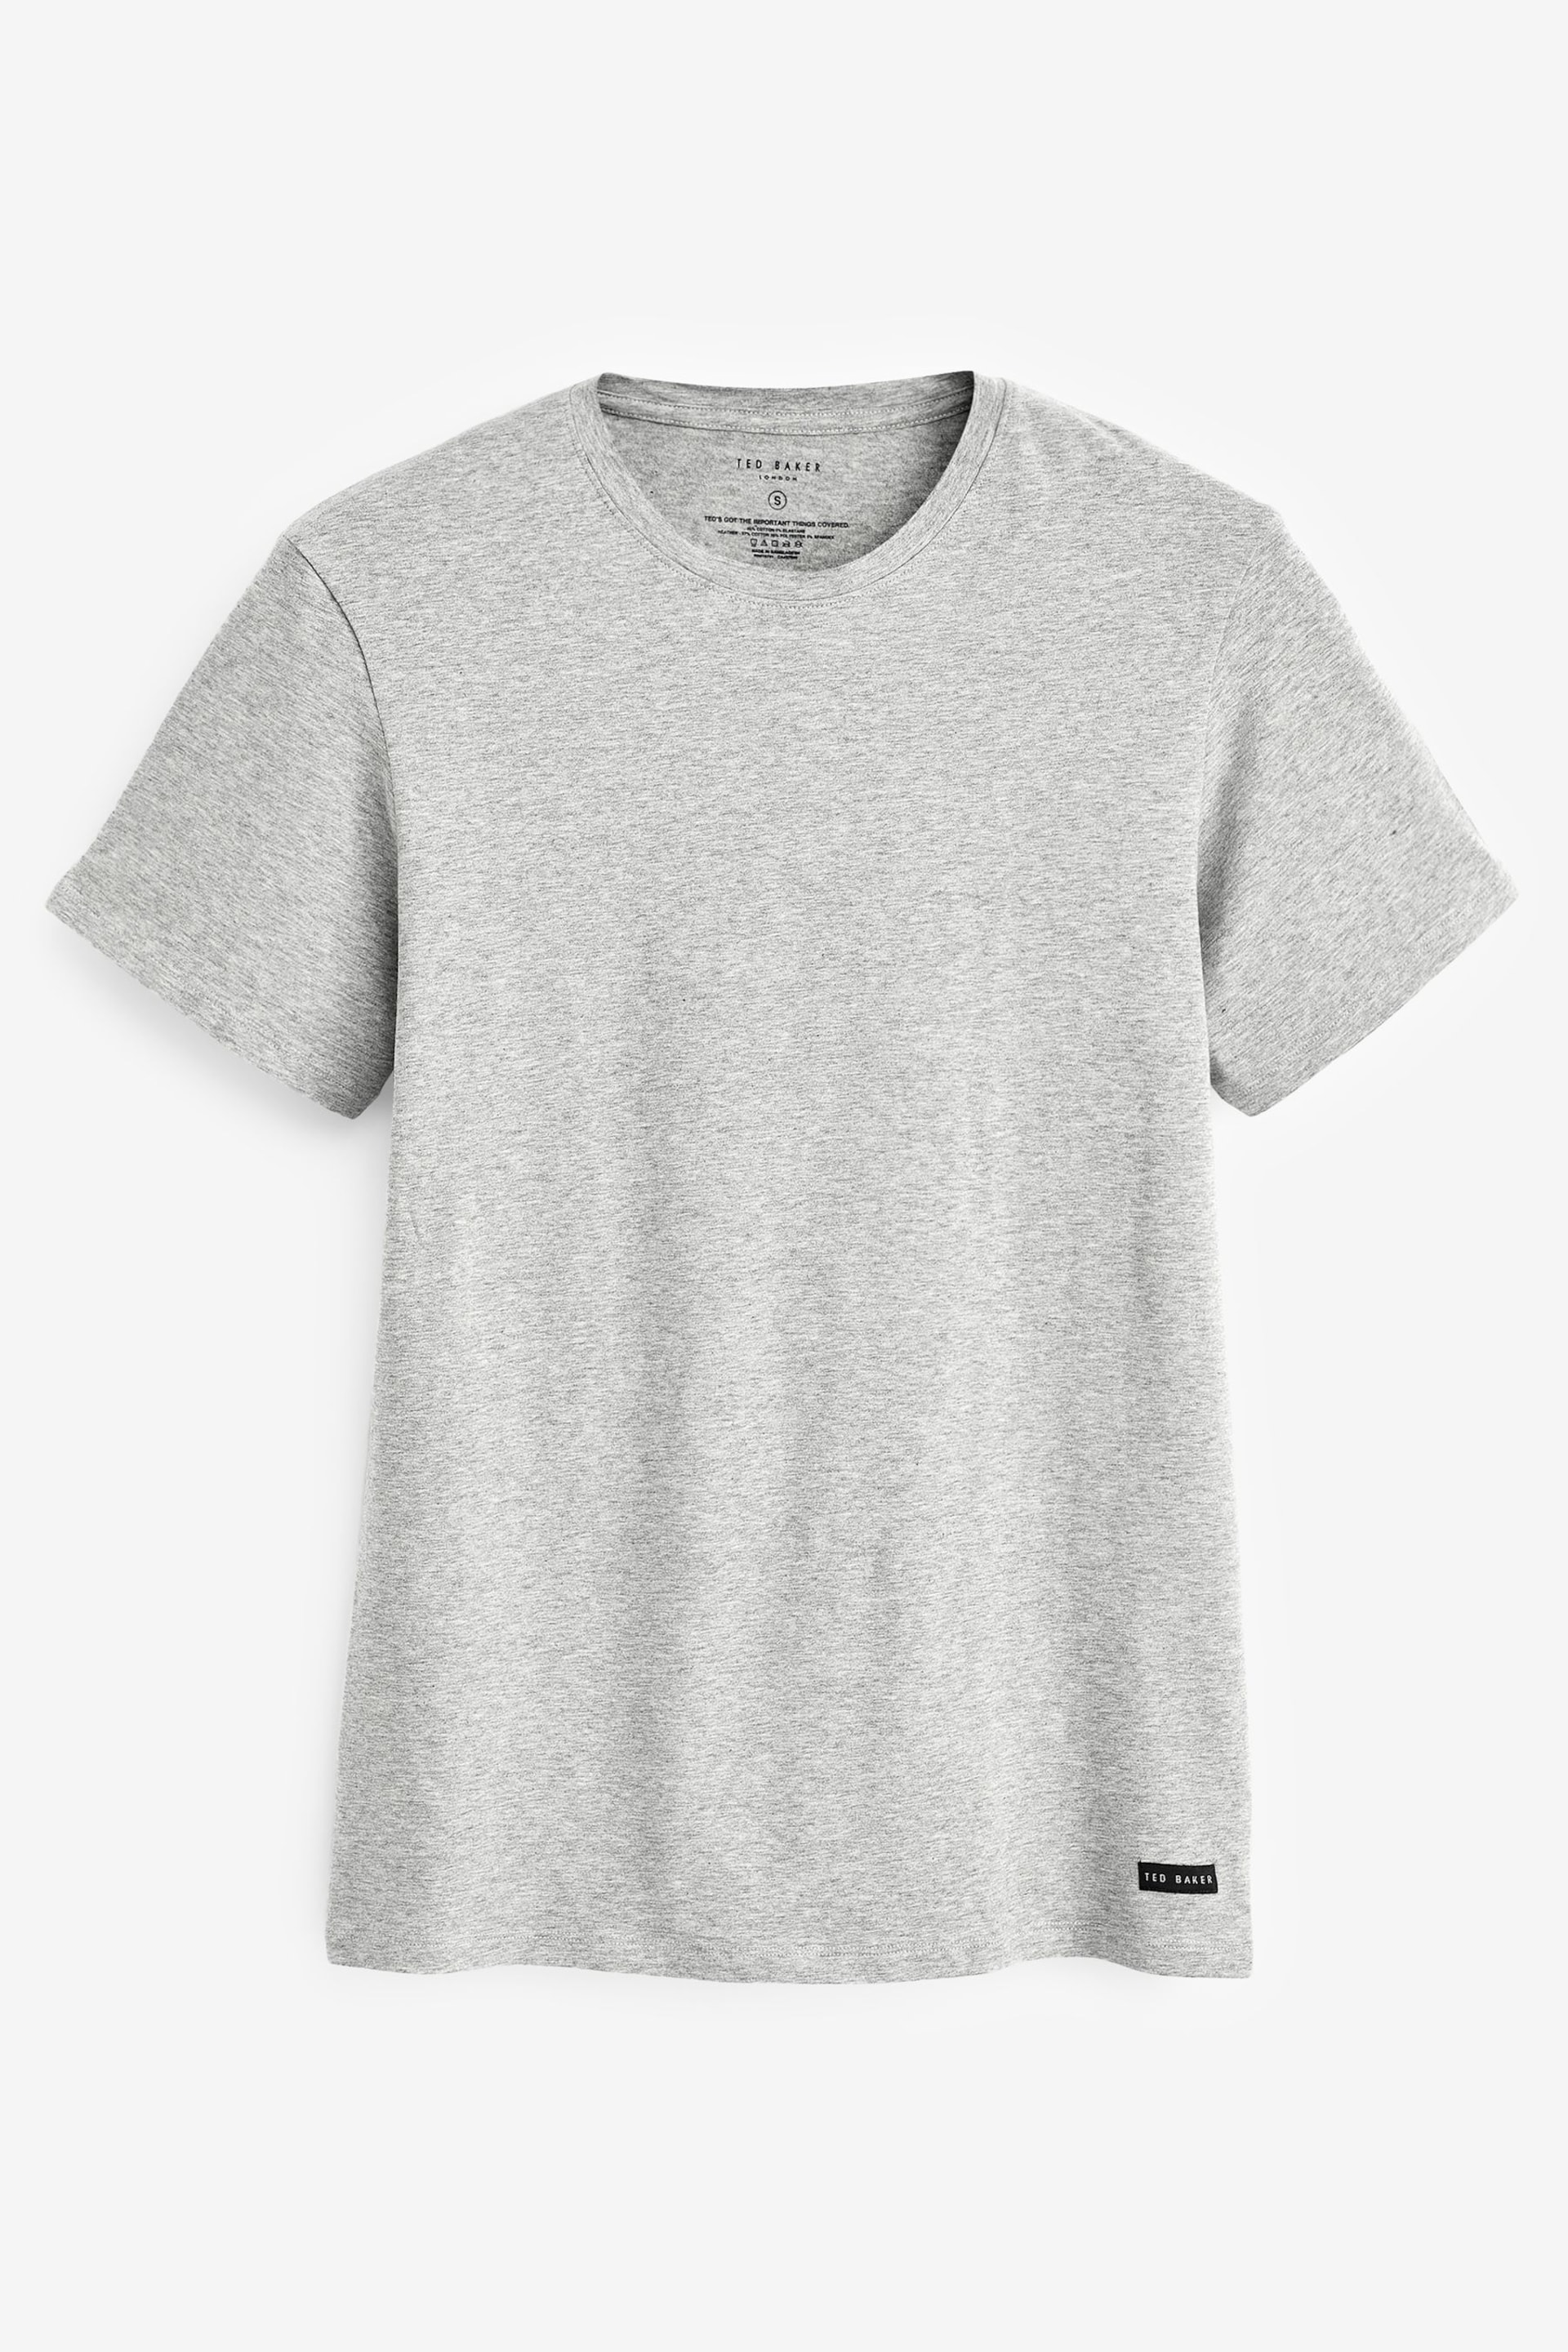 Ted Baker Grey Crew Neck T-Shirts 3 Pack - Image 9 of 9